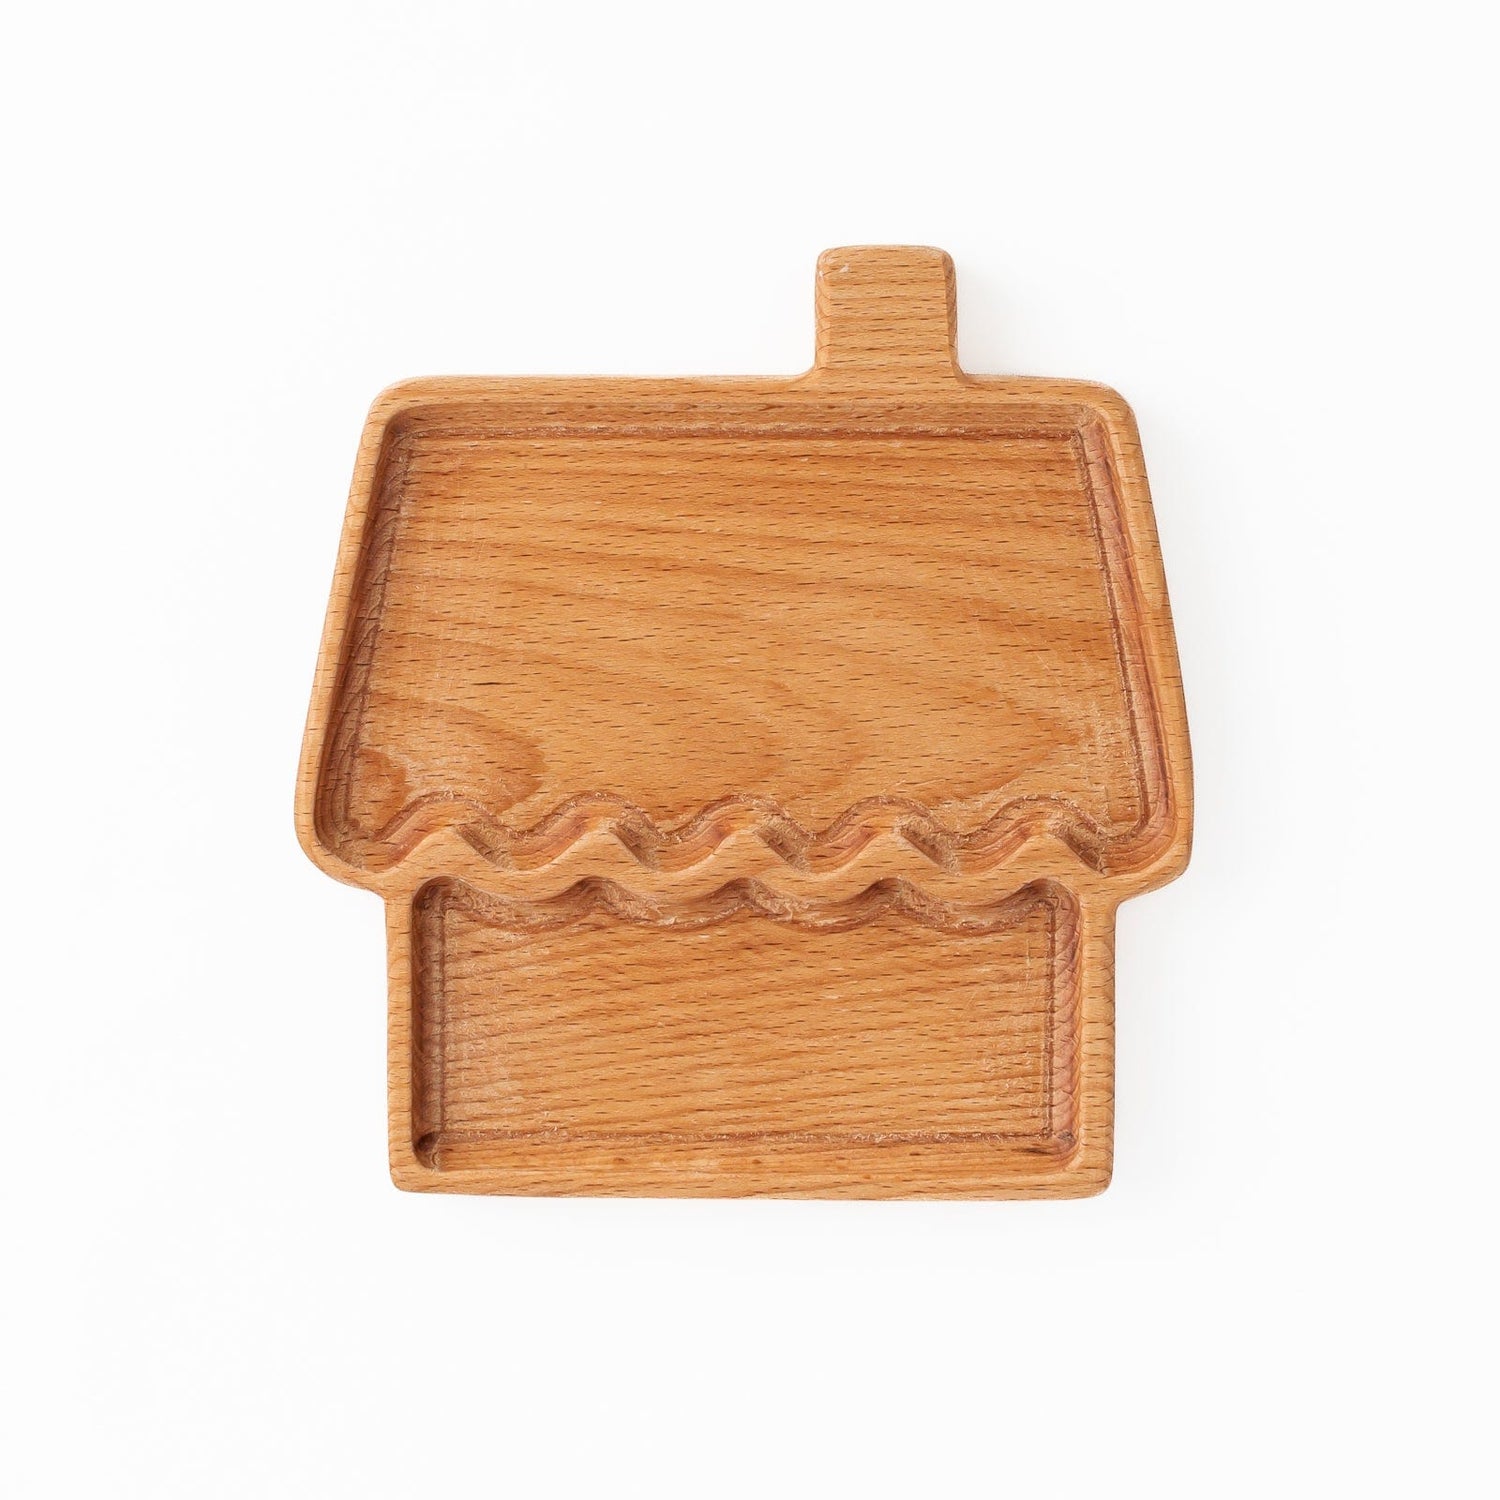 Aw & Co. Sensory Play Wooden Gingerbread House Plate / Sensory Tray (Made in Canada)